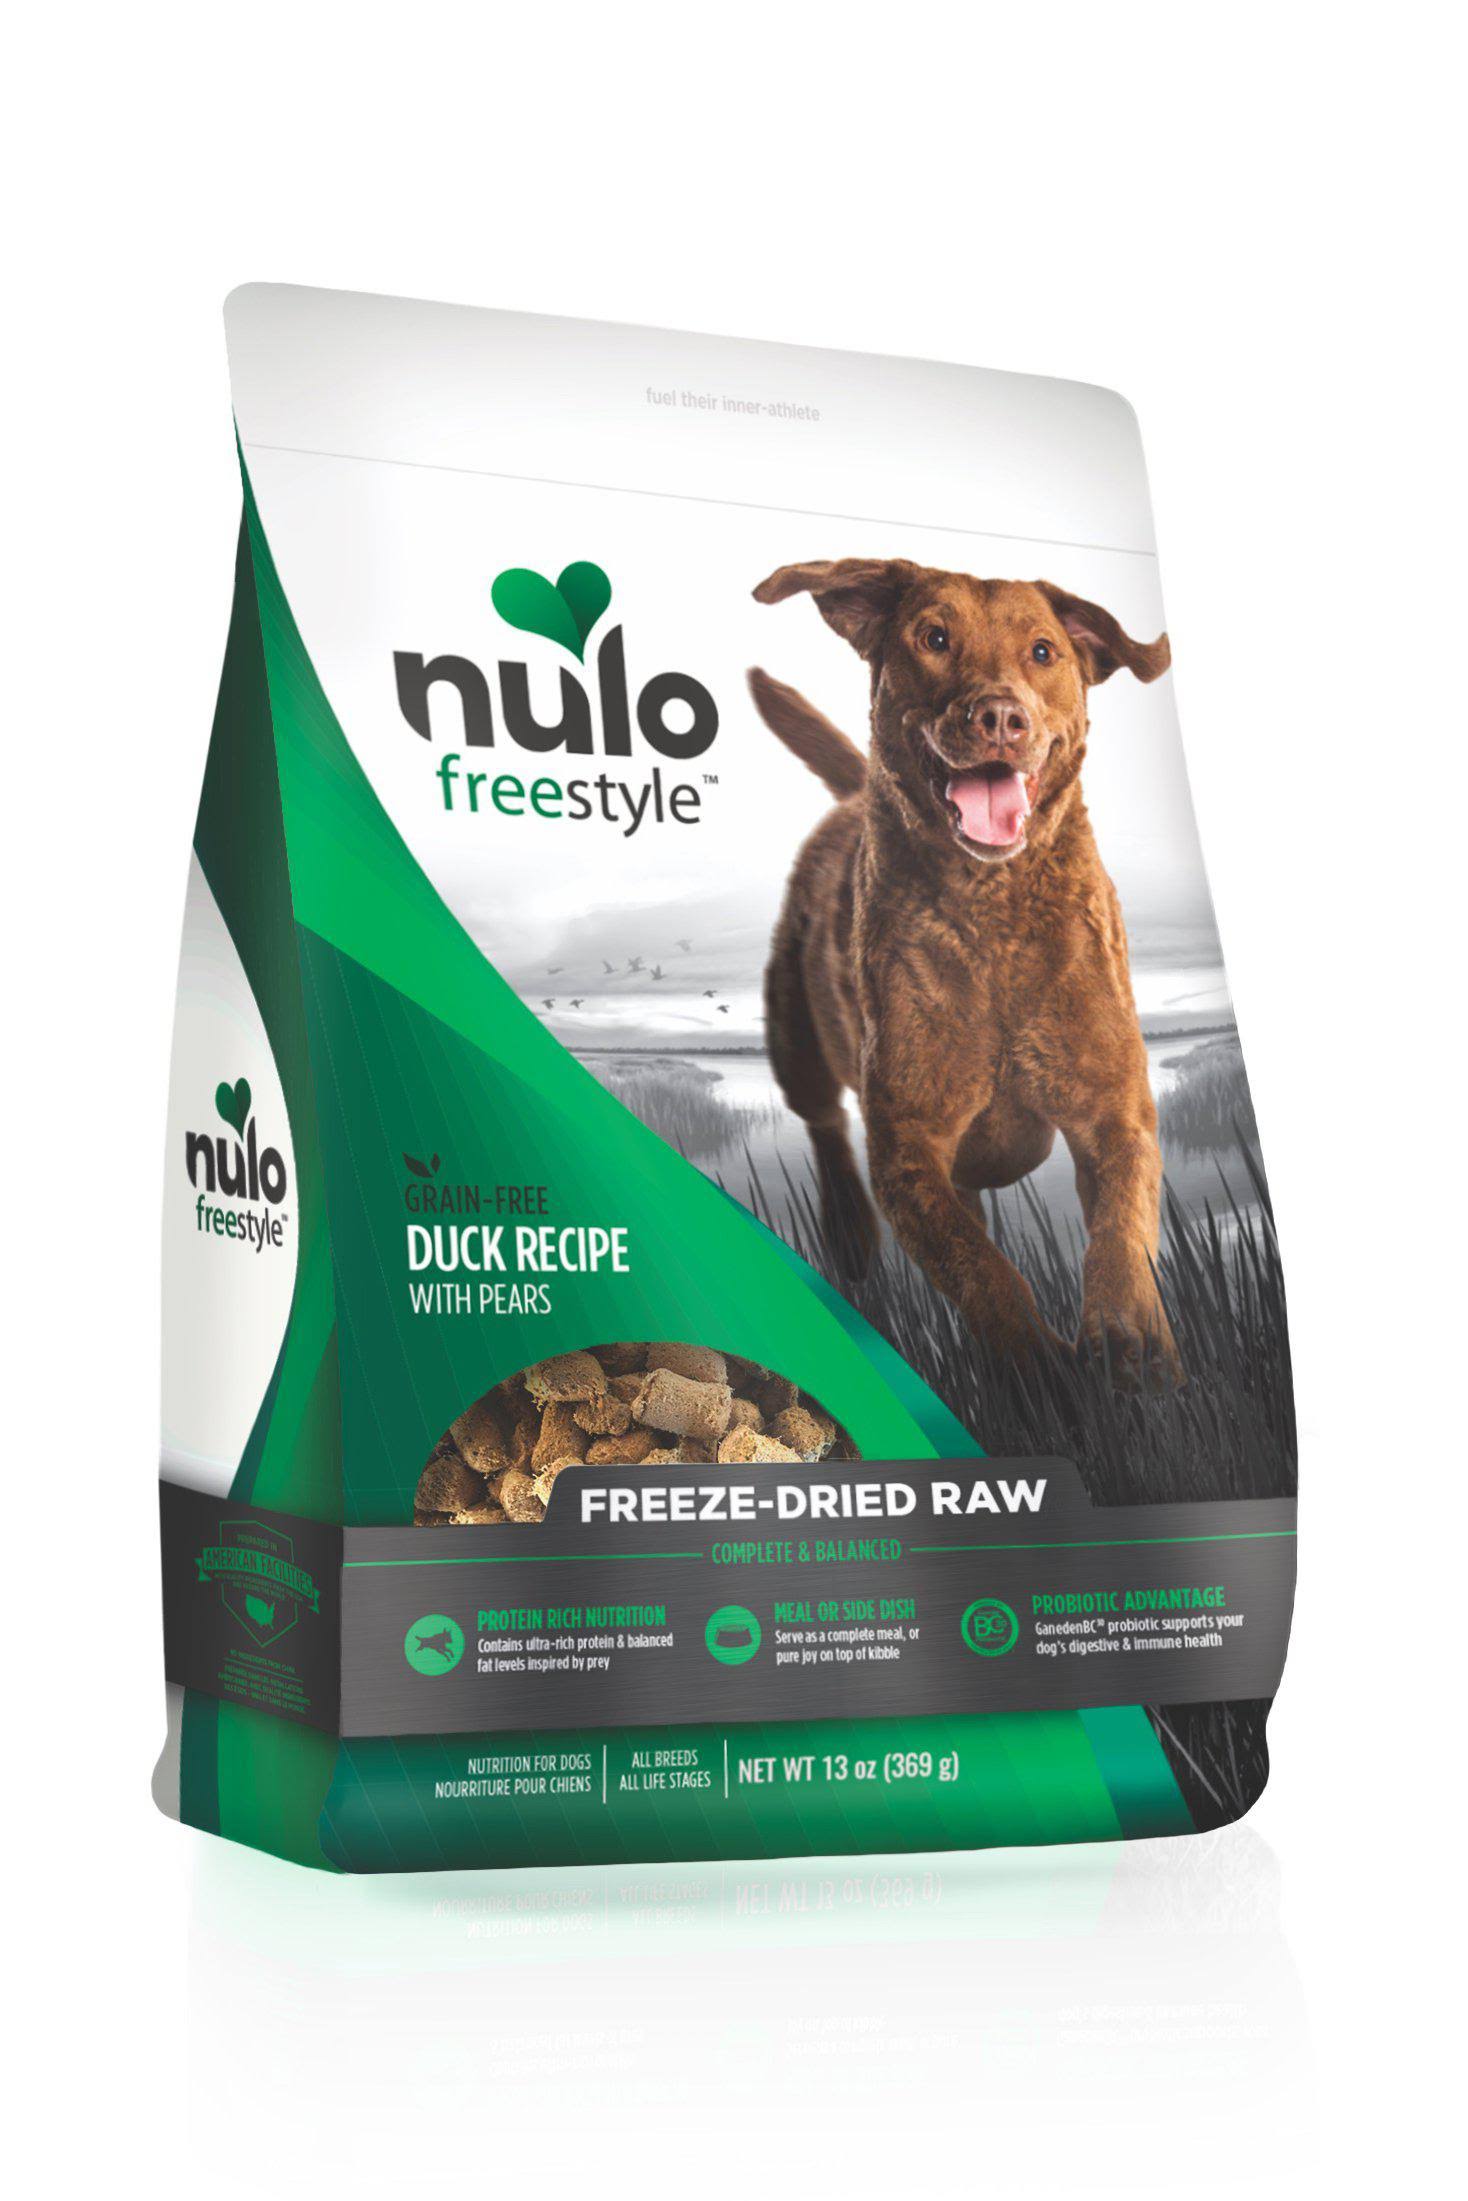 Nulo Freestyle Grain-Free Duck with Pears Freeze-Dried Raw Dog Food, 13 oz.